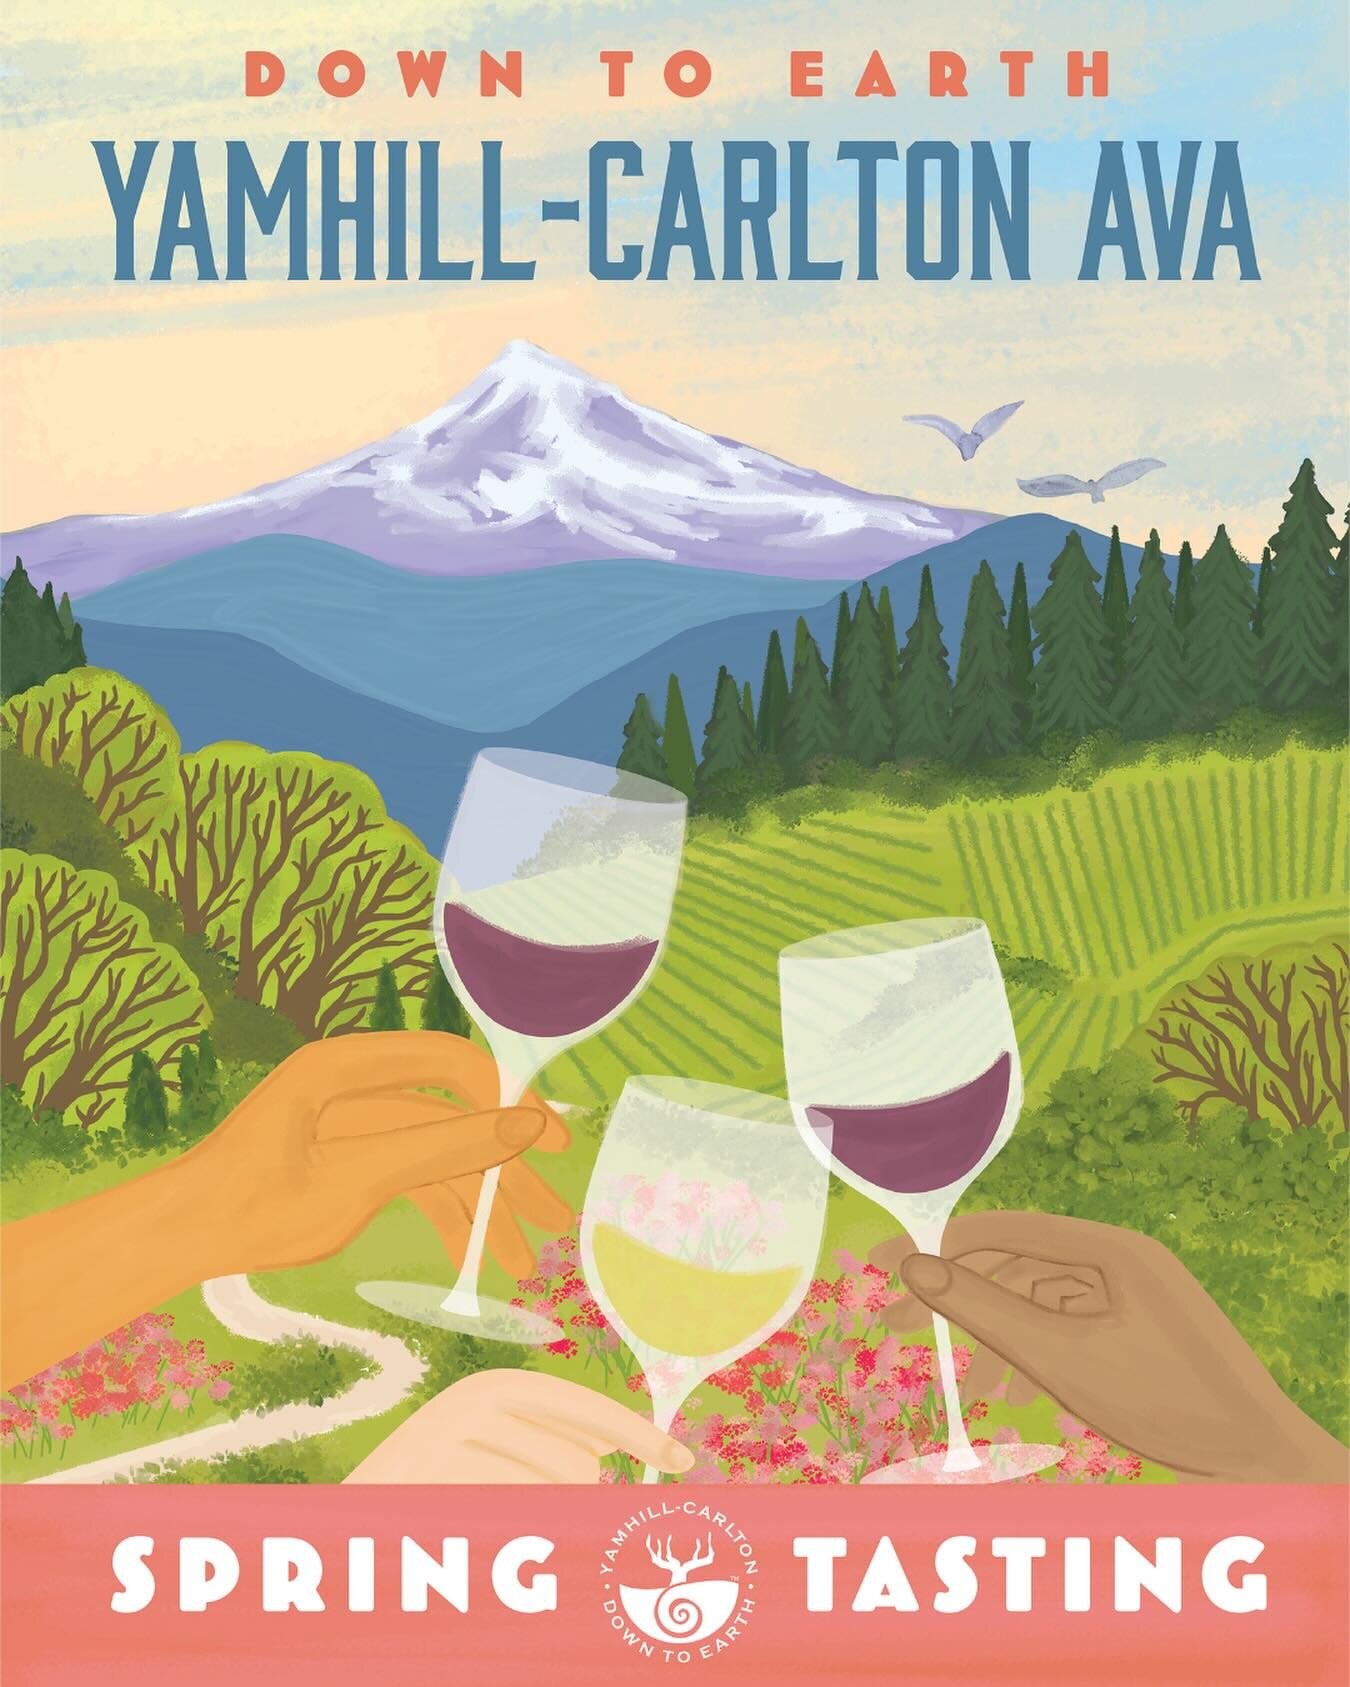 Join us Saturday, April 20 for our region&rsquo;s Spring Tasting at Abbey Road Farm! Enjoy wine from 40 Yamhill-Carlton wineries and food from @caballeros.catering. Don&rsquo;t miss this incredible opportunity to enjoy Yamhill-Carlton&rsquo;s Pinot N